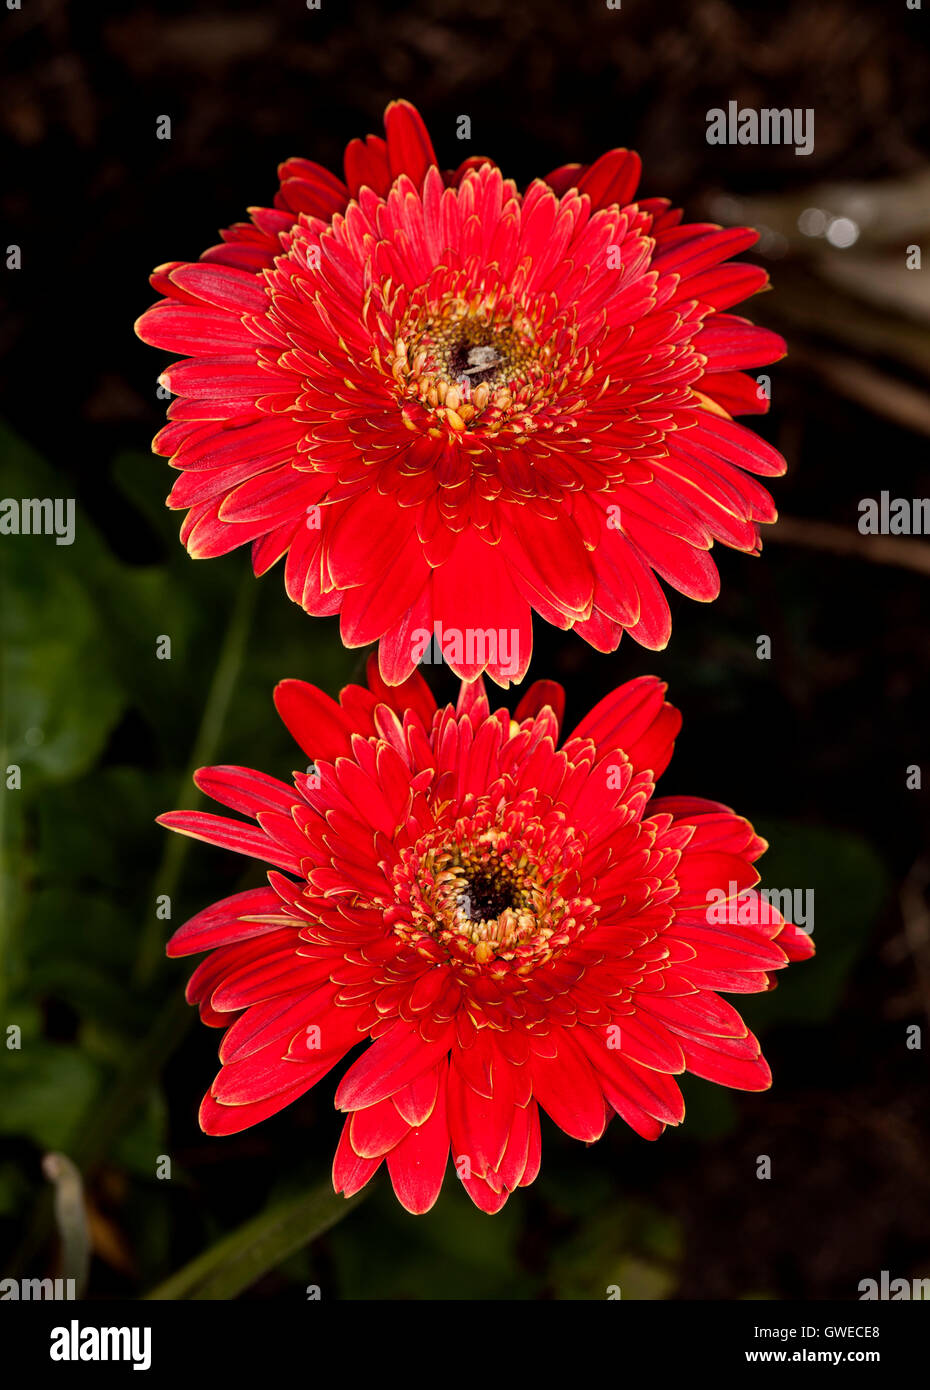 Two large and spectacular vivid red gerbera flowers with double layers of petals on dark background Stock Photo